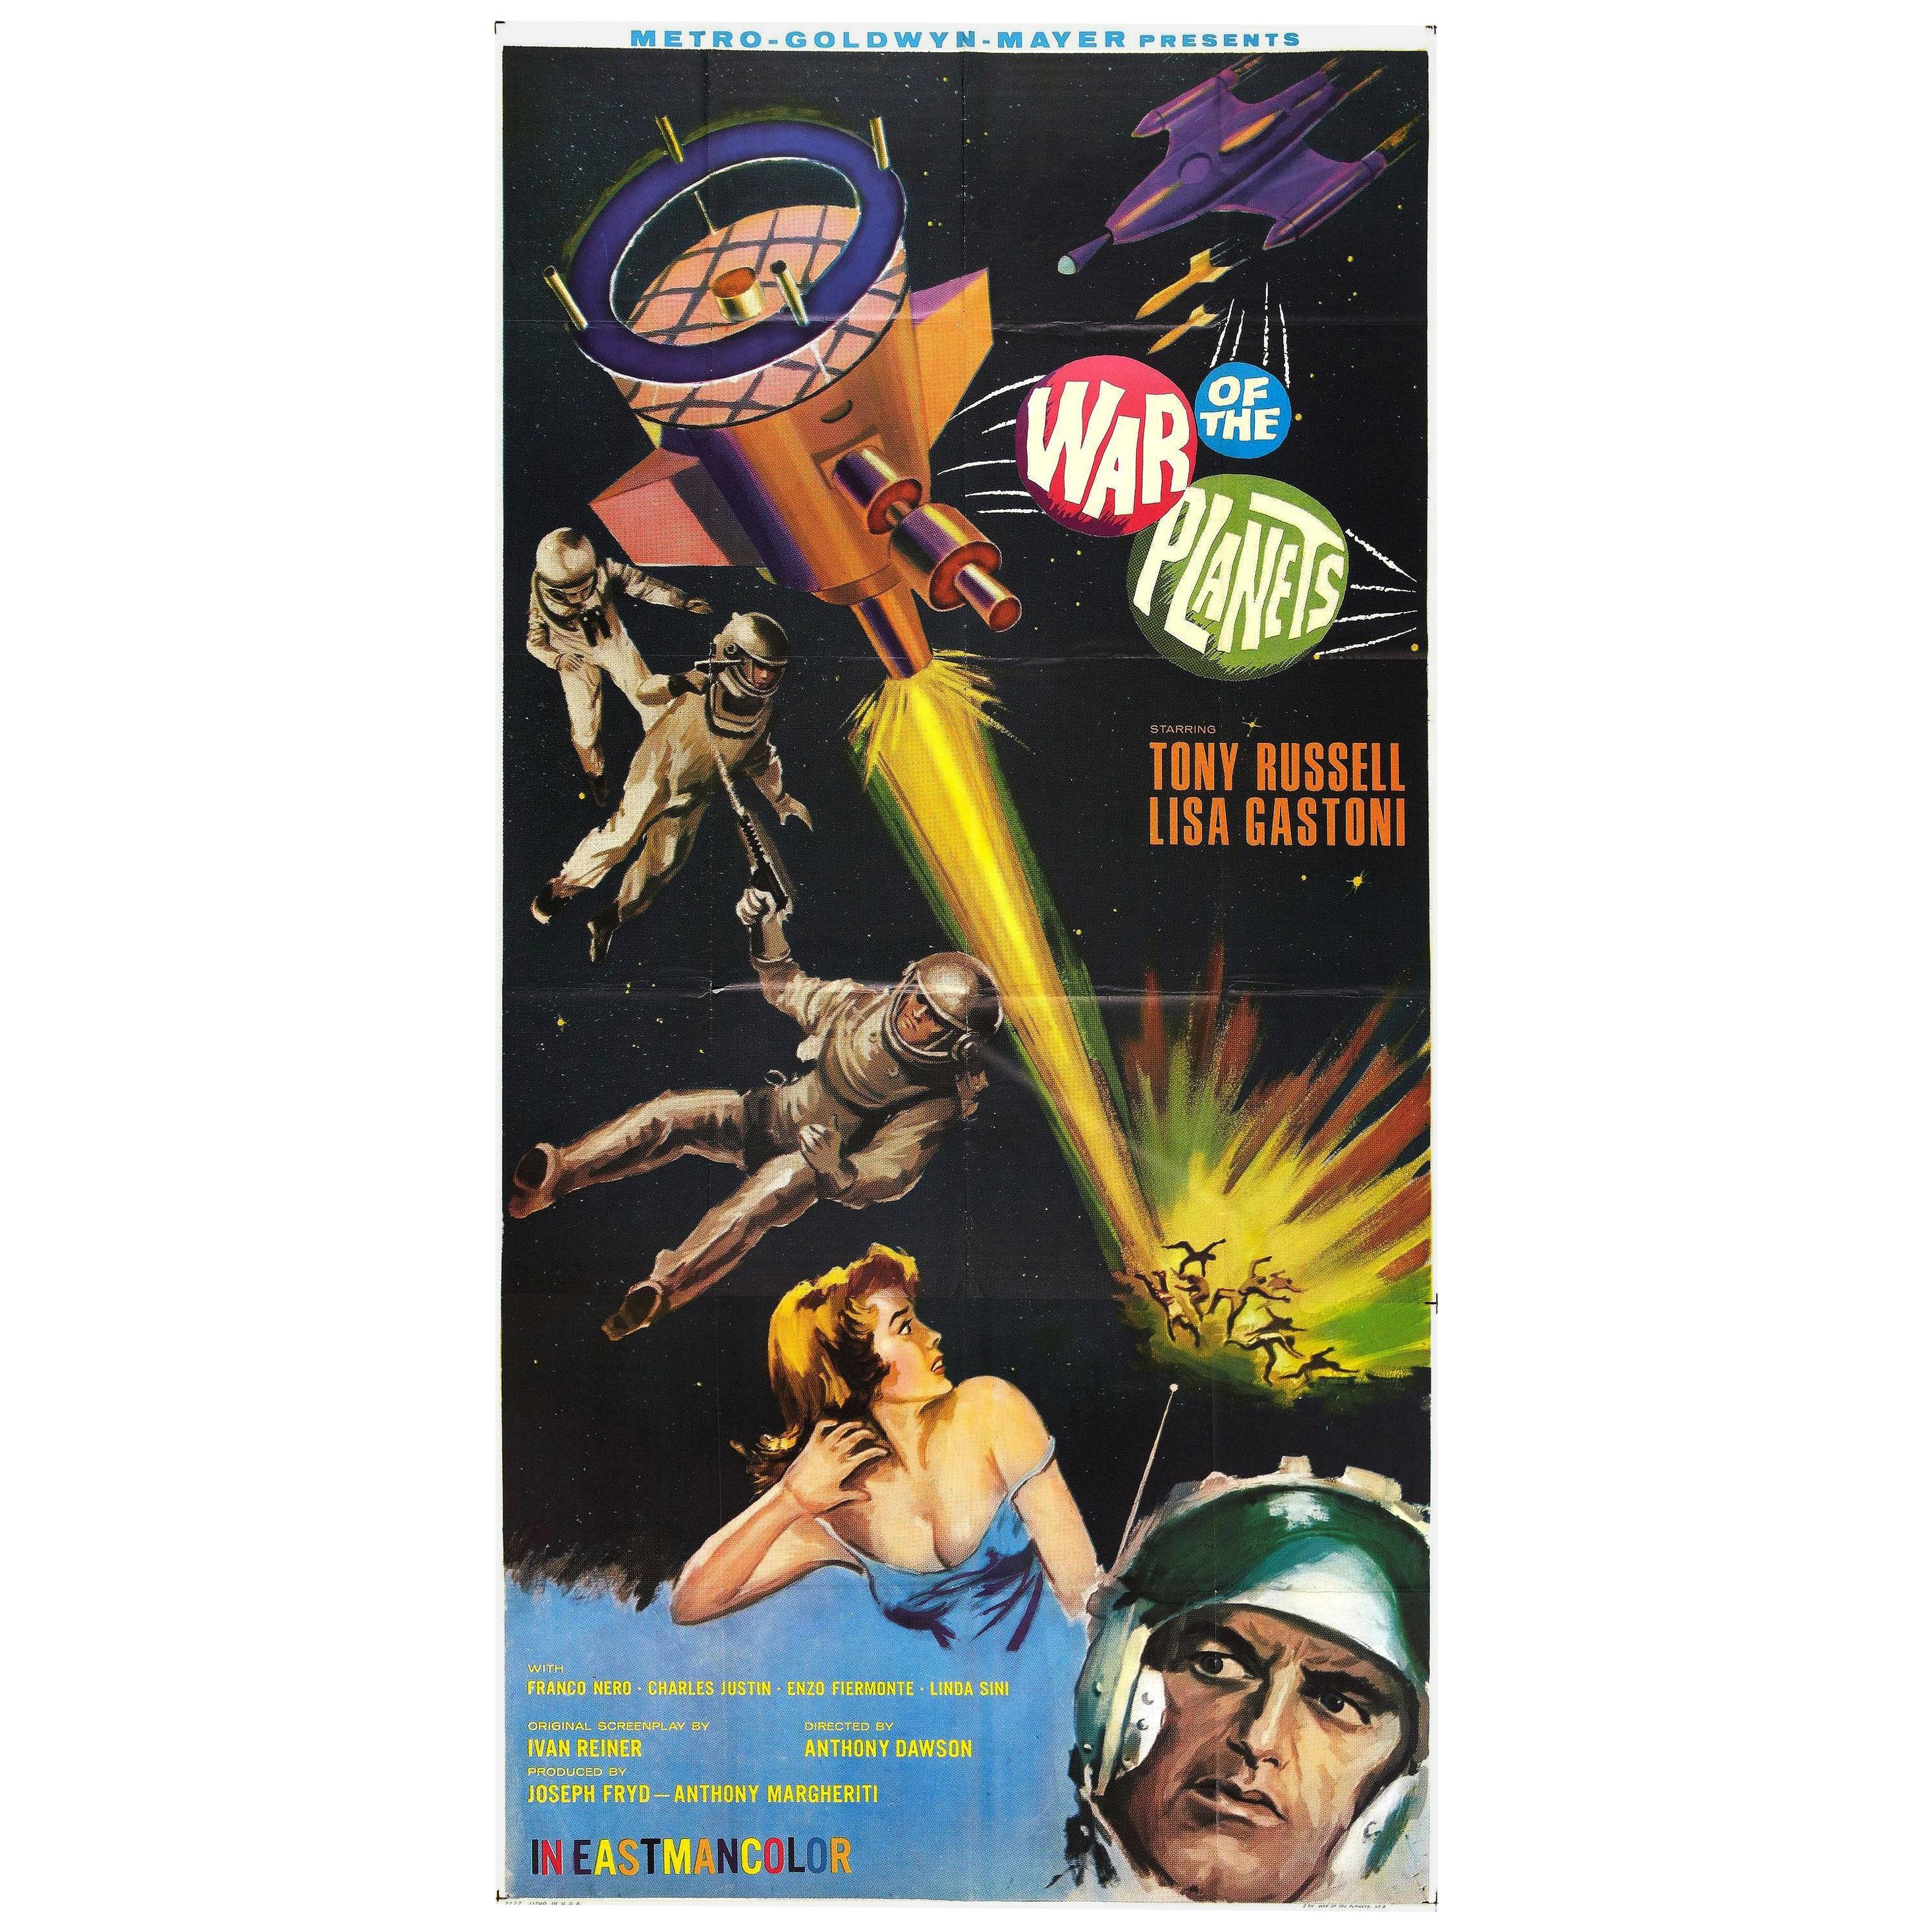 Three Sheet Original "The War of The Planets" Movie Poster